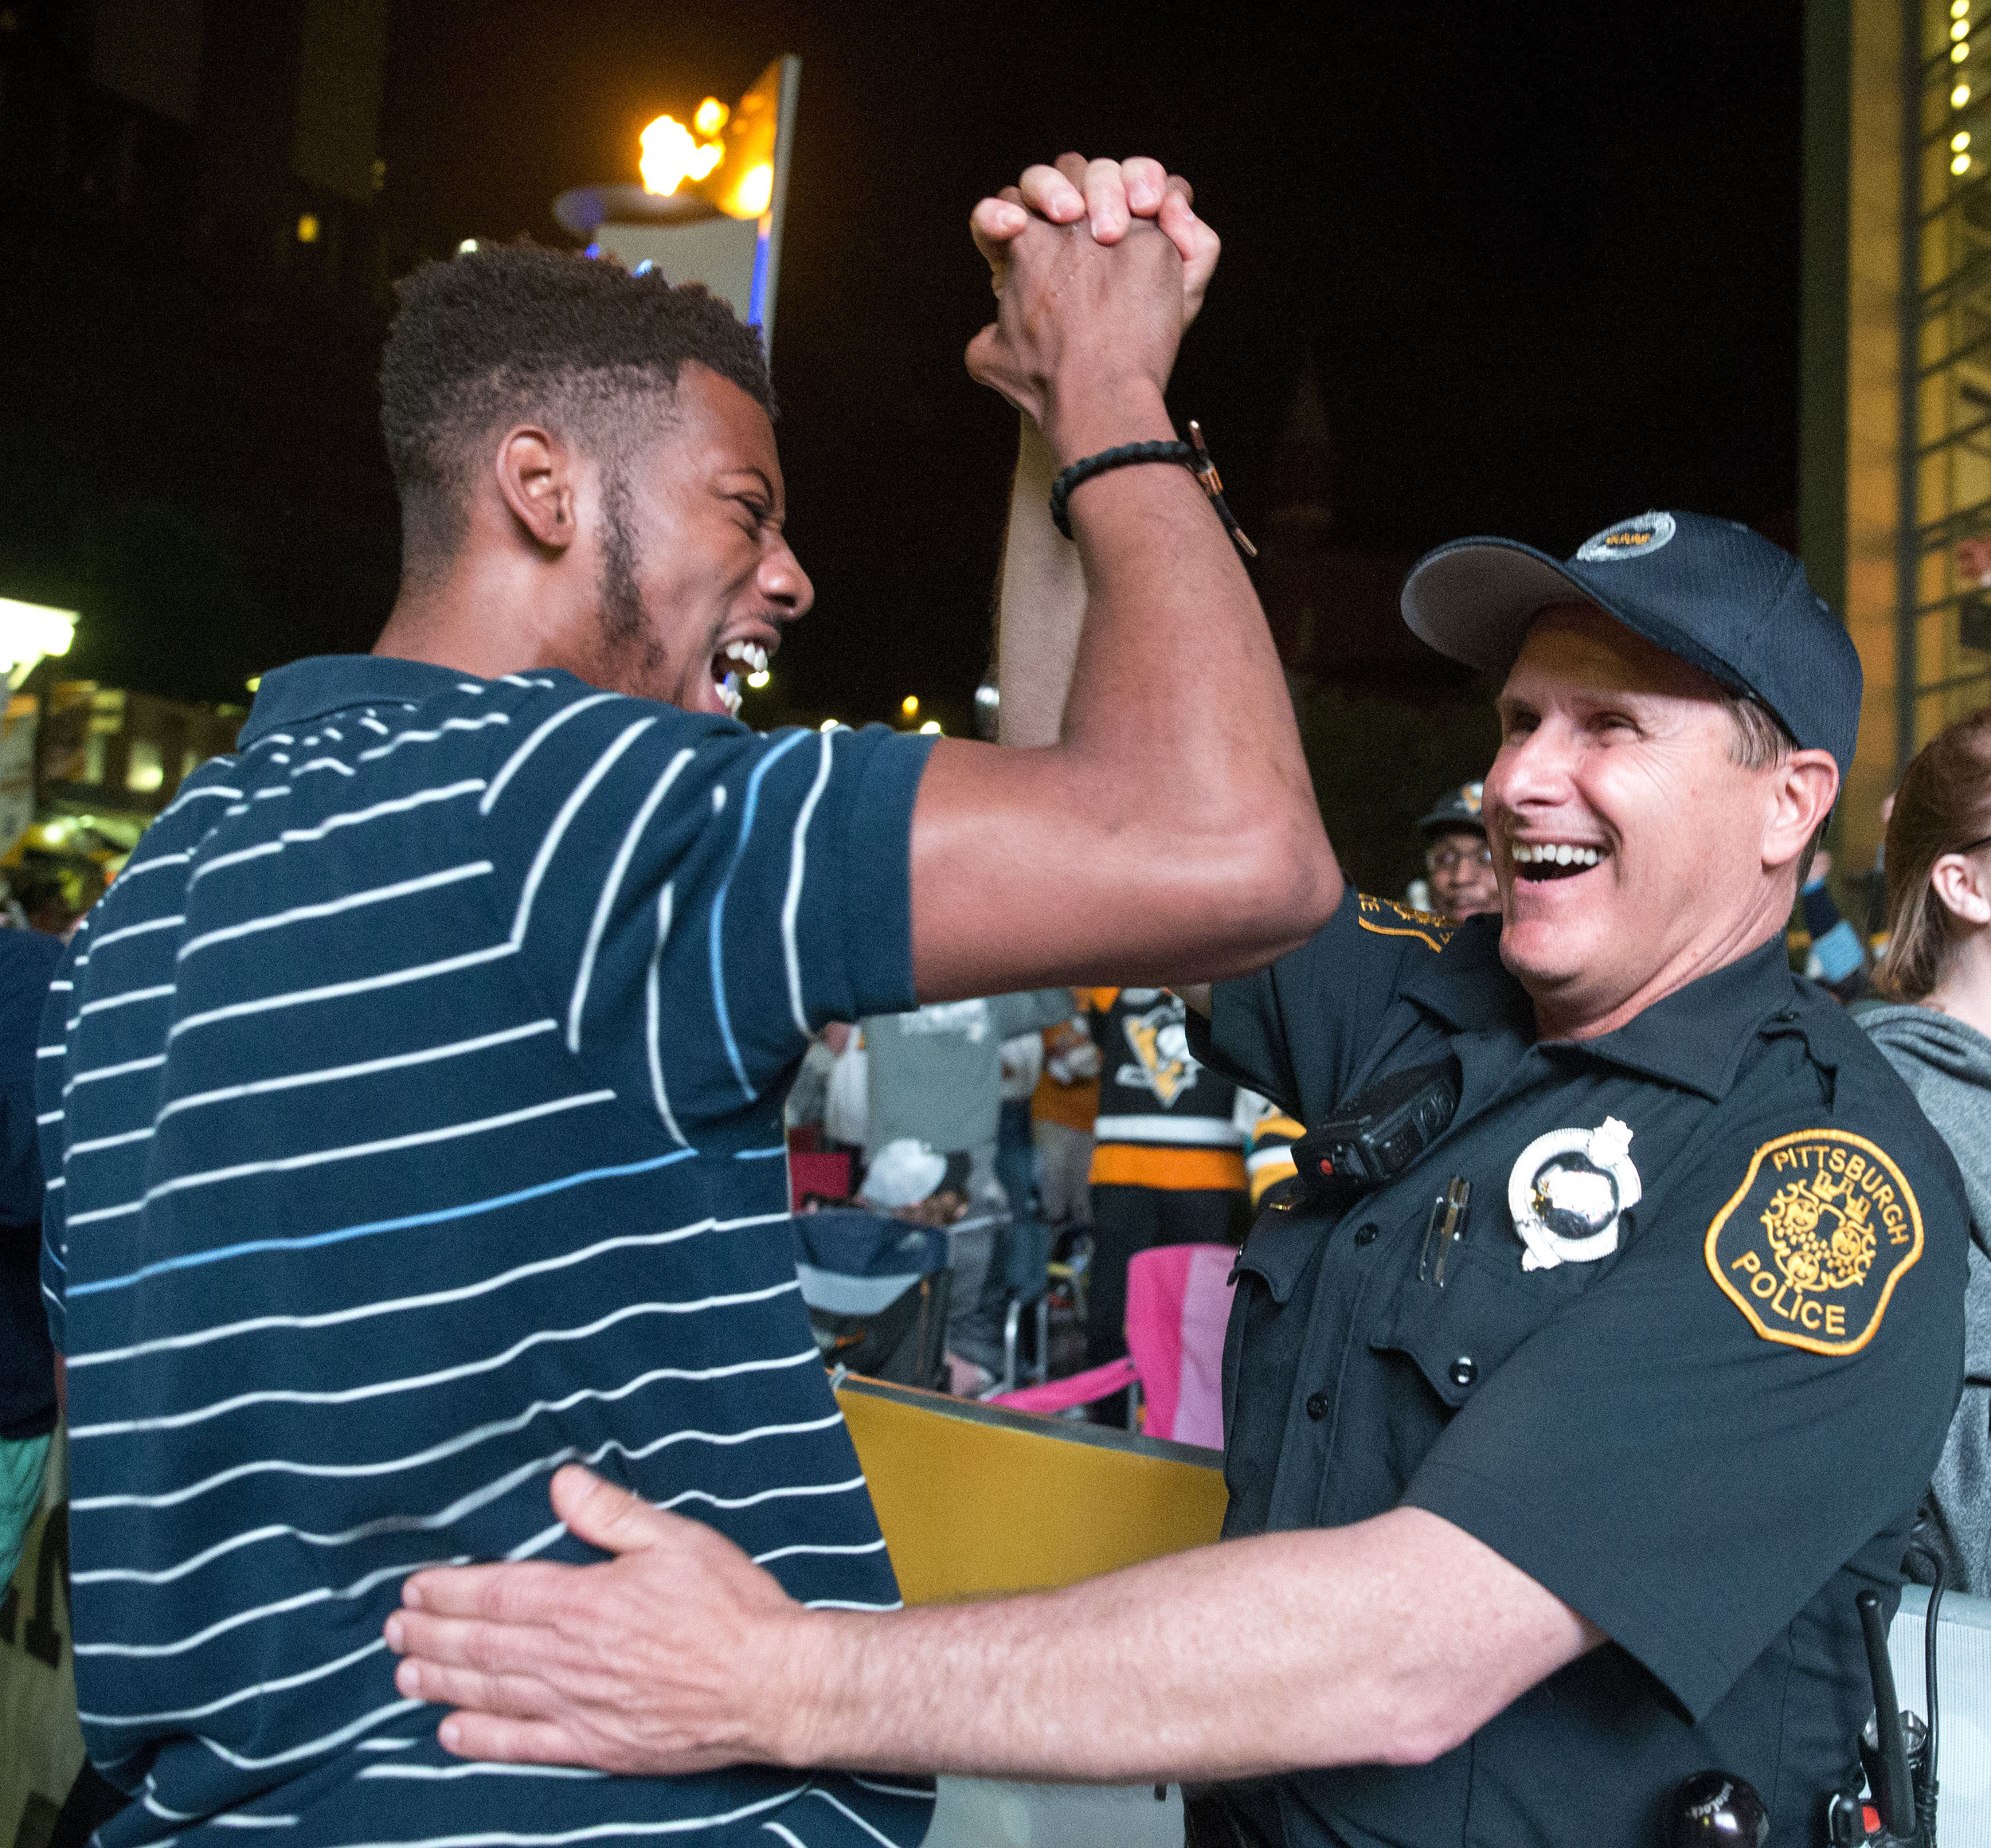  Demtrius Carrington, of Baldwin, celebrates with officer Mike Rosato, of Pittsburgh, after the Penguins scored and lead the game 4-1 against the Predators during Game 2 of the Stanley Cup Finals on Wednesday, May 31, 2017 at PPG Paints Arena.&nbsp; 